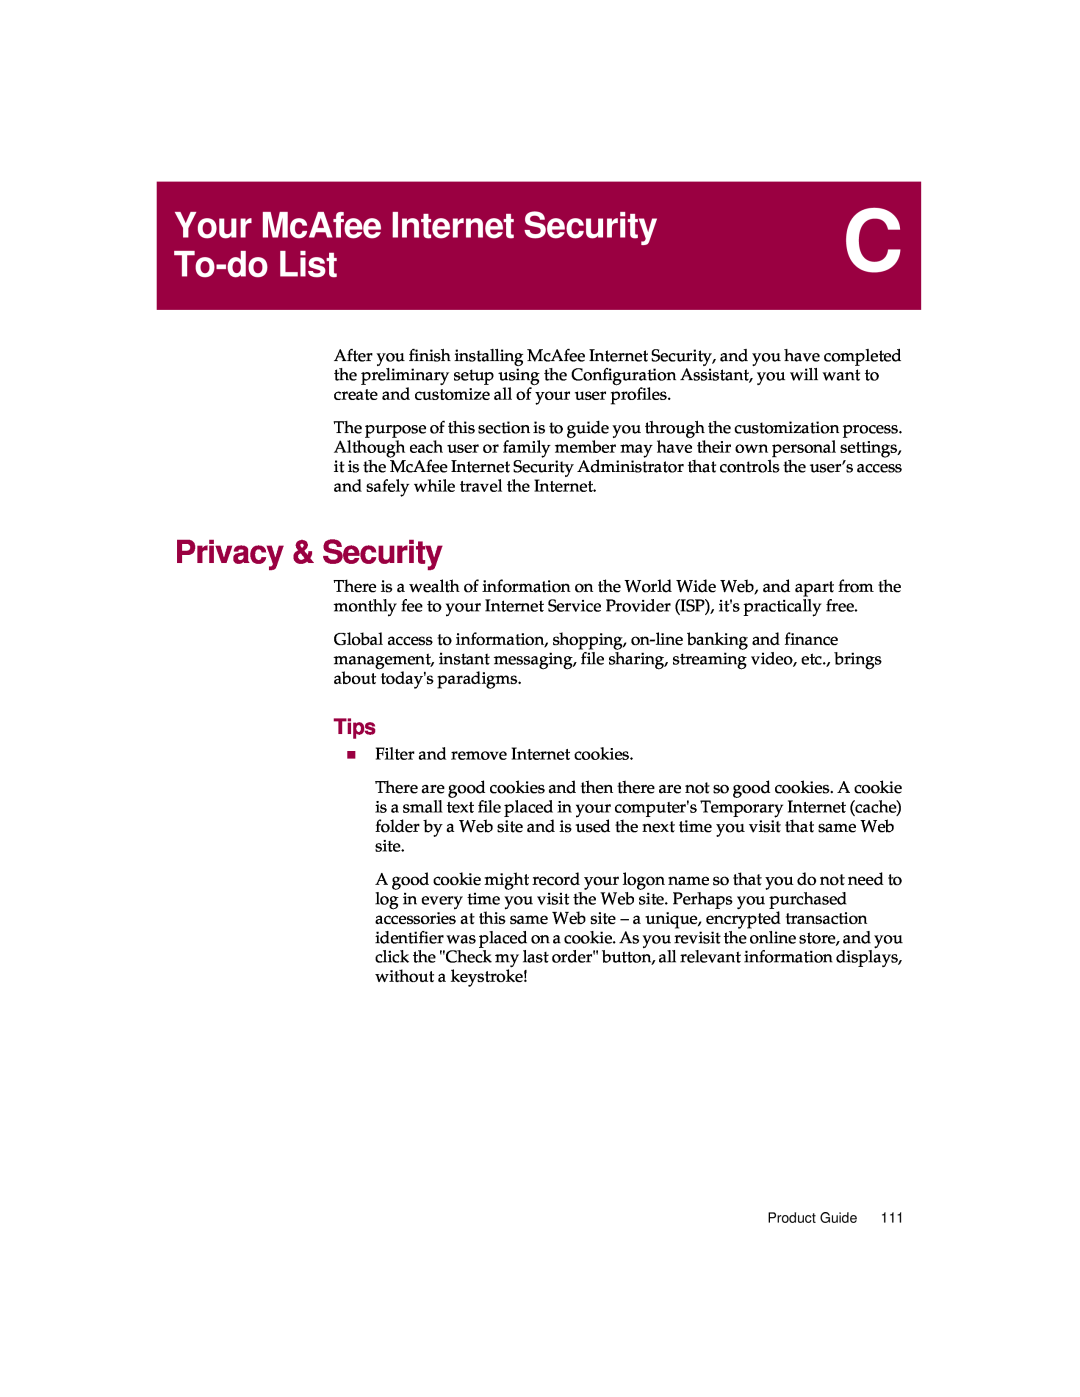 McAfee 5 manual Your McAfee Internet Security To-doList, Privacy & Security, Tips 